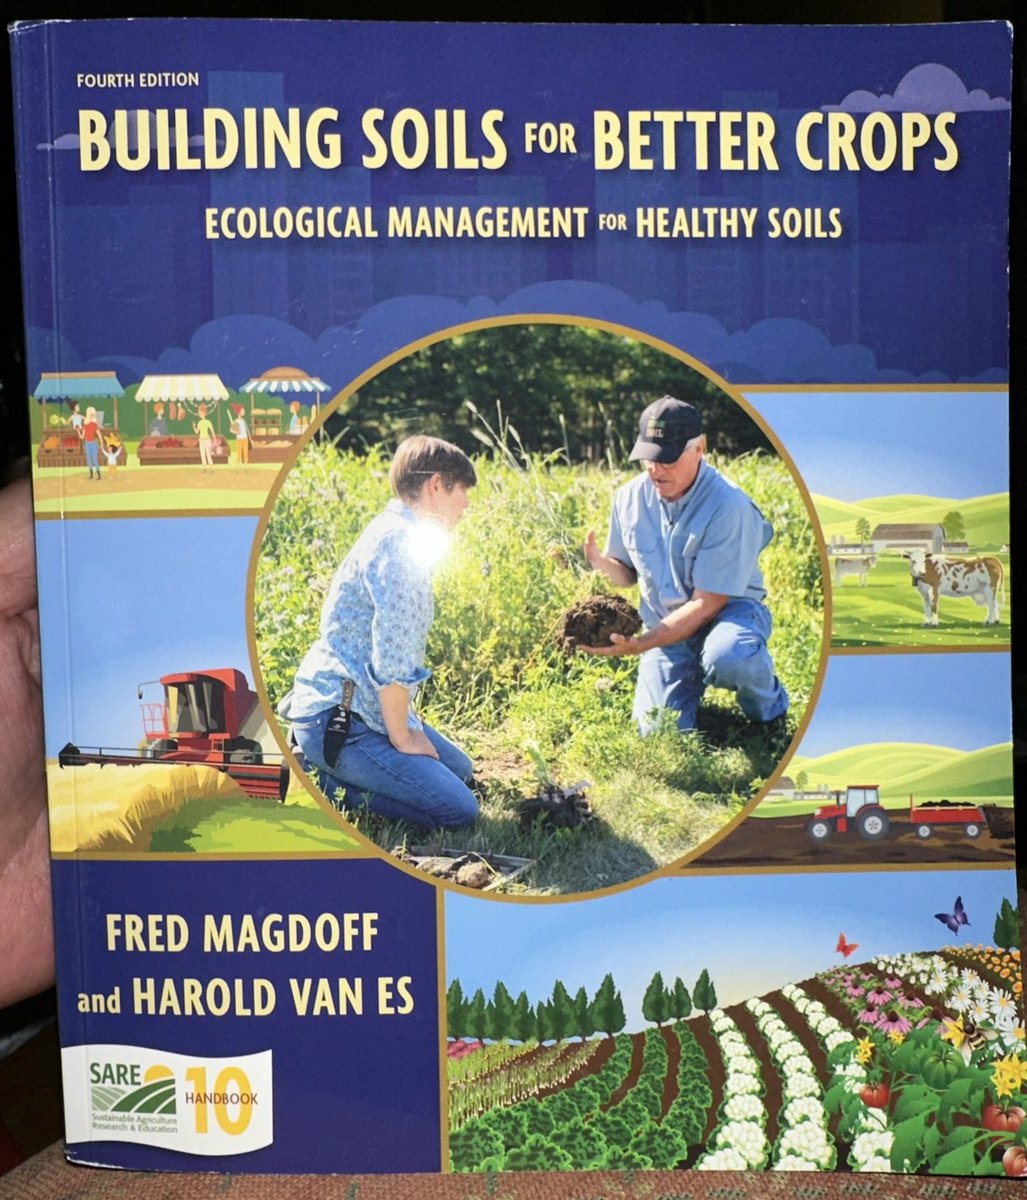 Came highly recommended- the learning continues!
#regenerativeagriculture #SoilHealth #soilcarbon